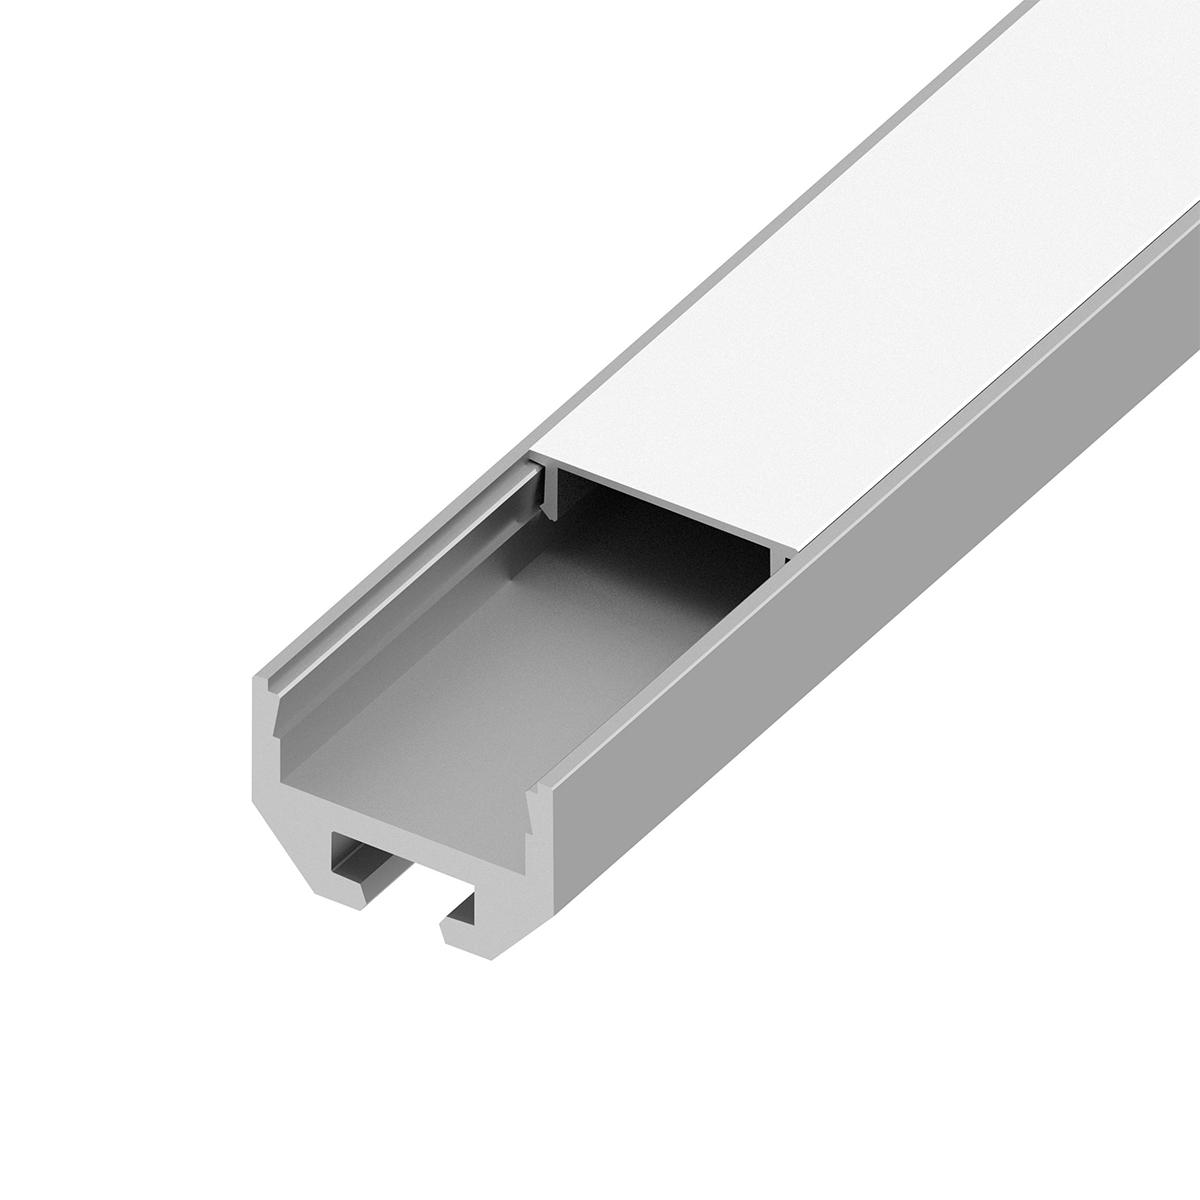 48in. Chromapath Builder, Square White LED Channels for 12mm strip lights